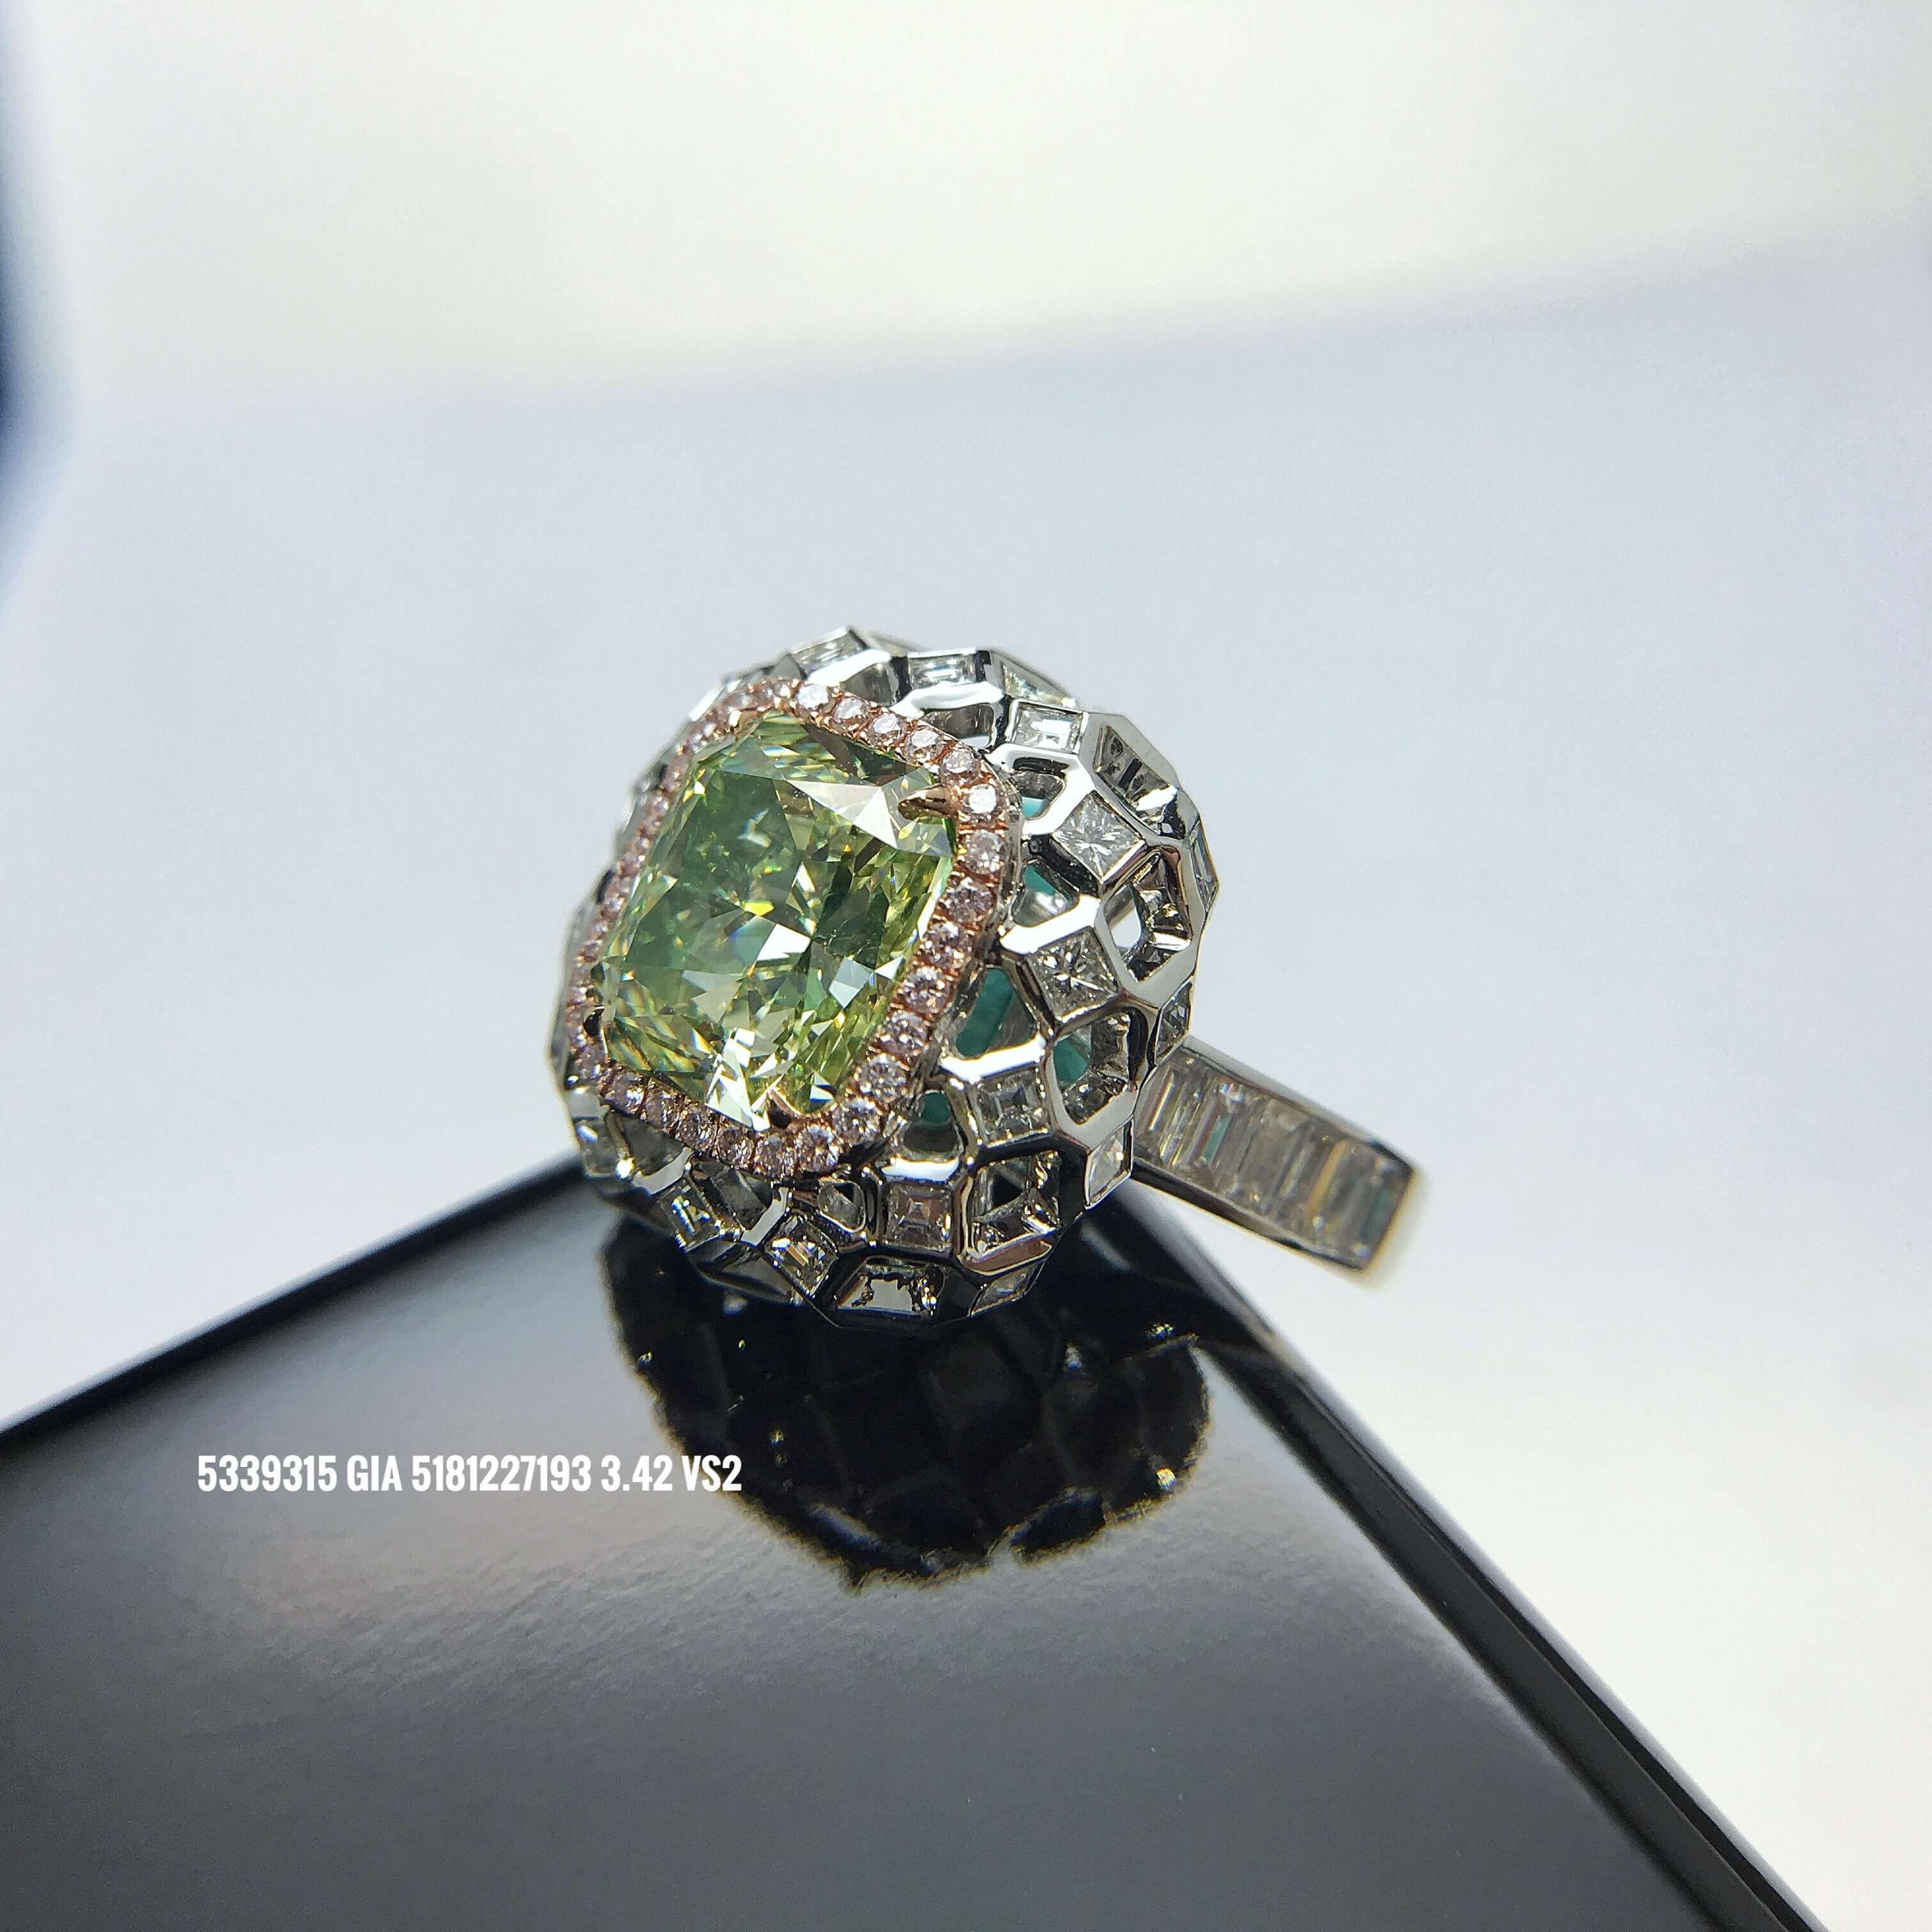 Fancy Green Yellow Diamond Ring, 3.42 Ct. (4.76 Ct. TW), Radiant shape, GIA Certified, 5181227193